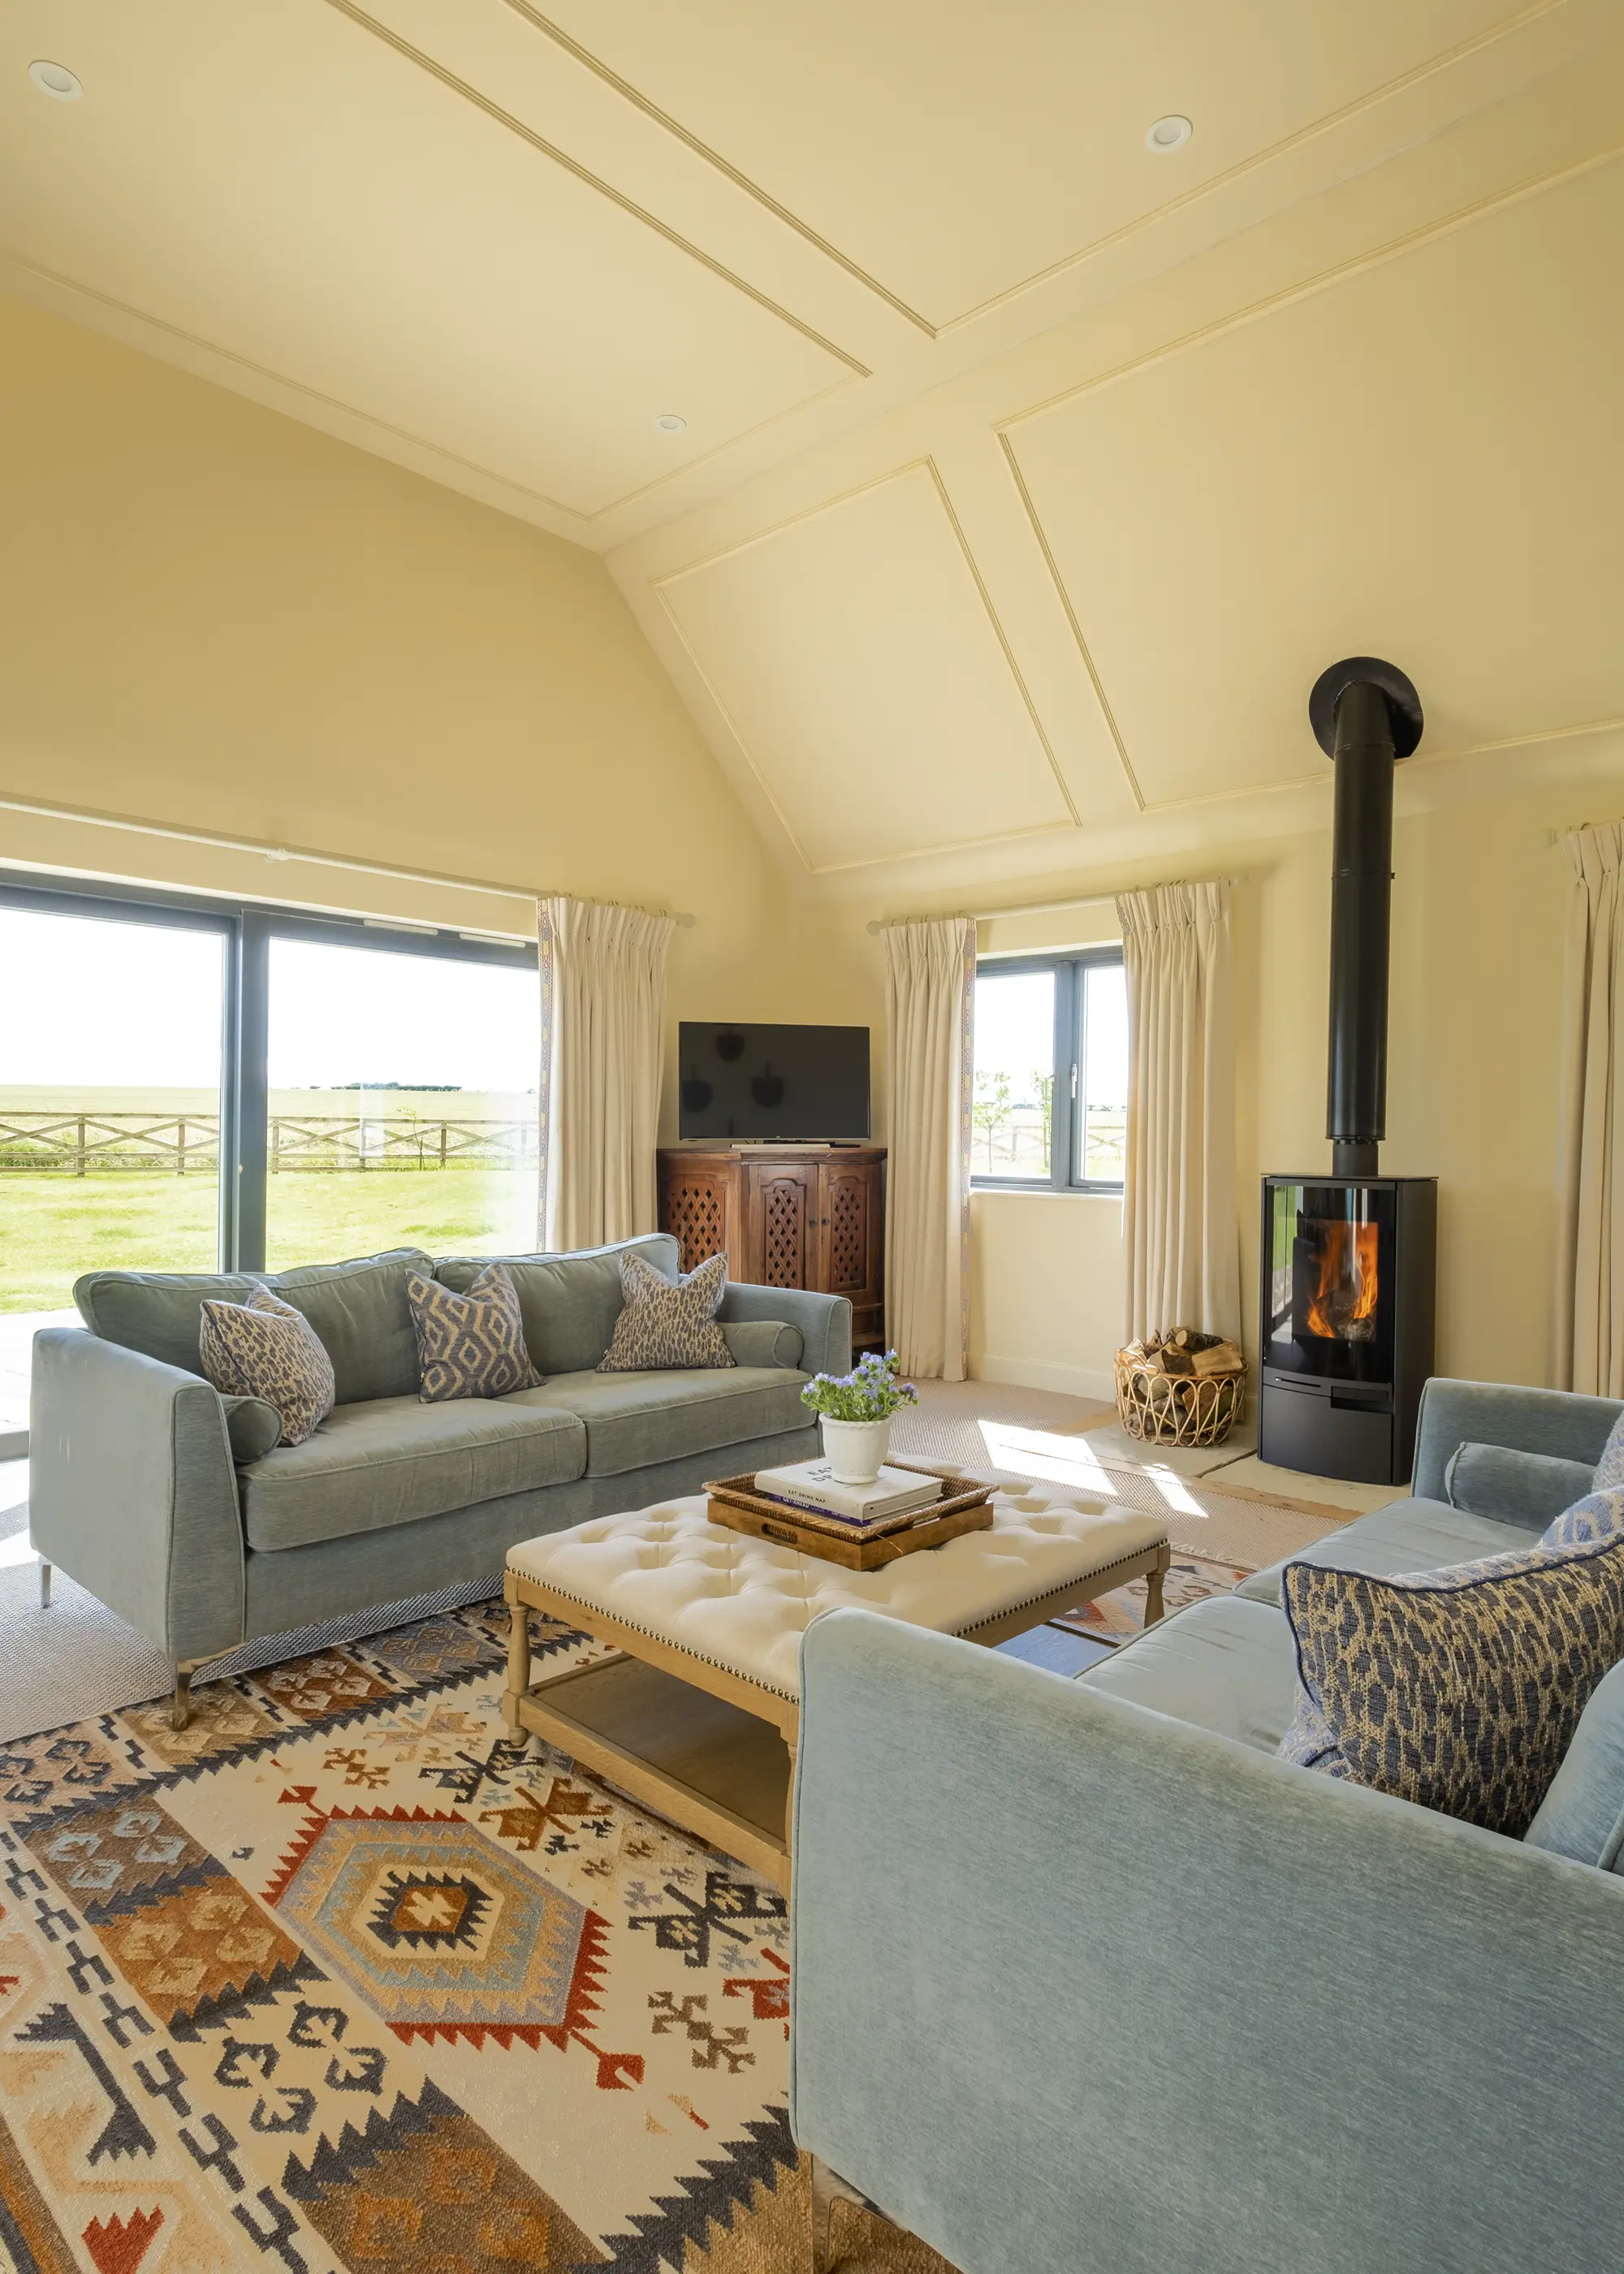 Characterful Timber Frame Self Build in Rural Northumberland